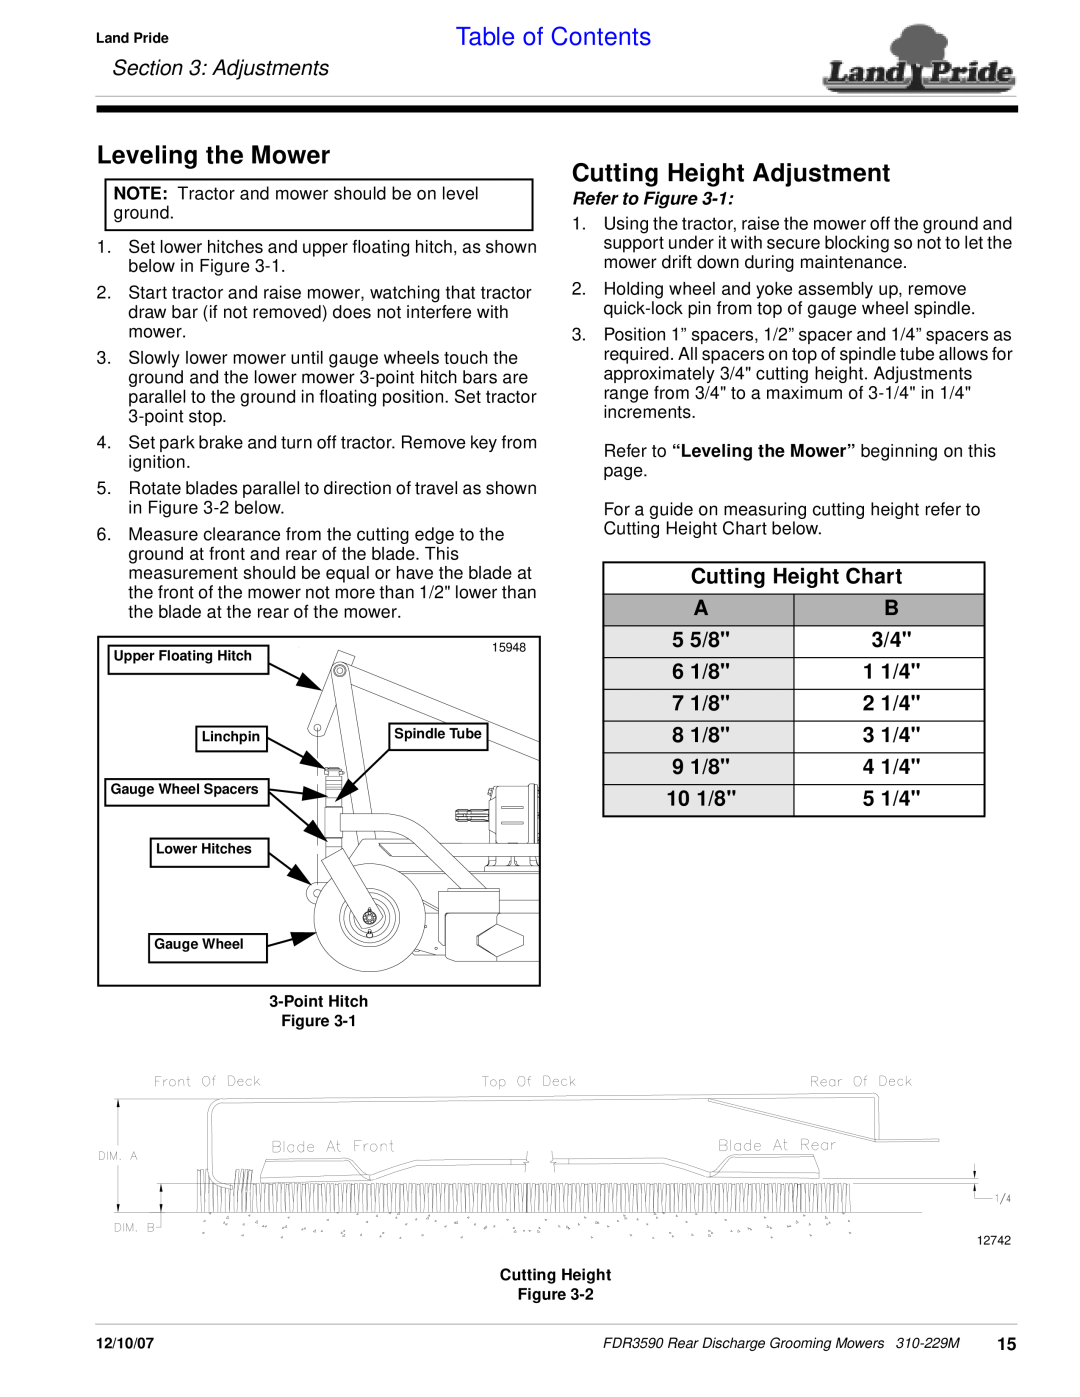 Land Pride FDR3590 Leveling the Mower, Cutting Height Adjustment, Adjustments, Cutting Height Chart, 5 5/8, 6 1/8, 1 1/4 